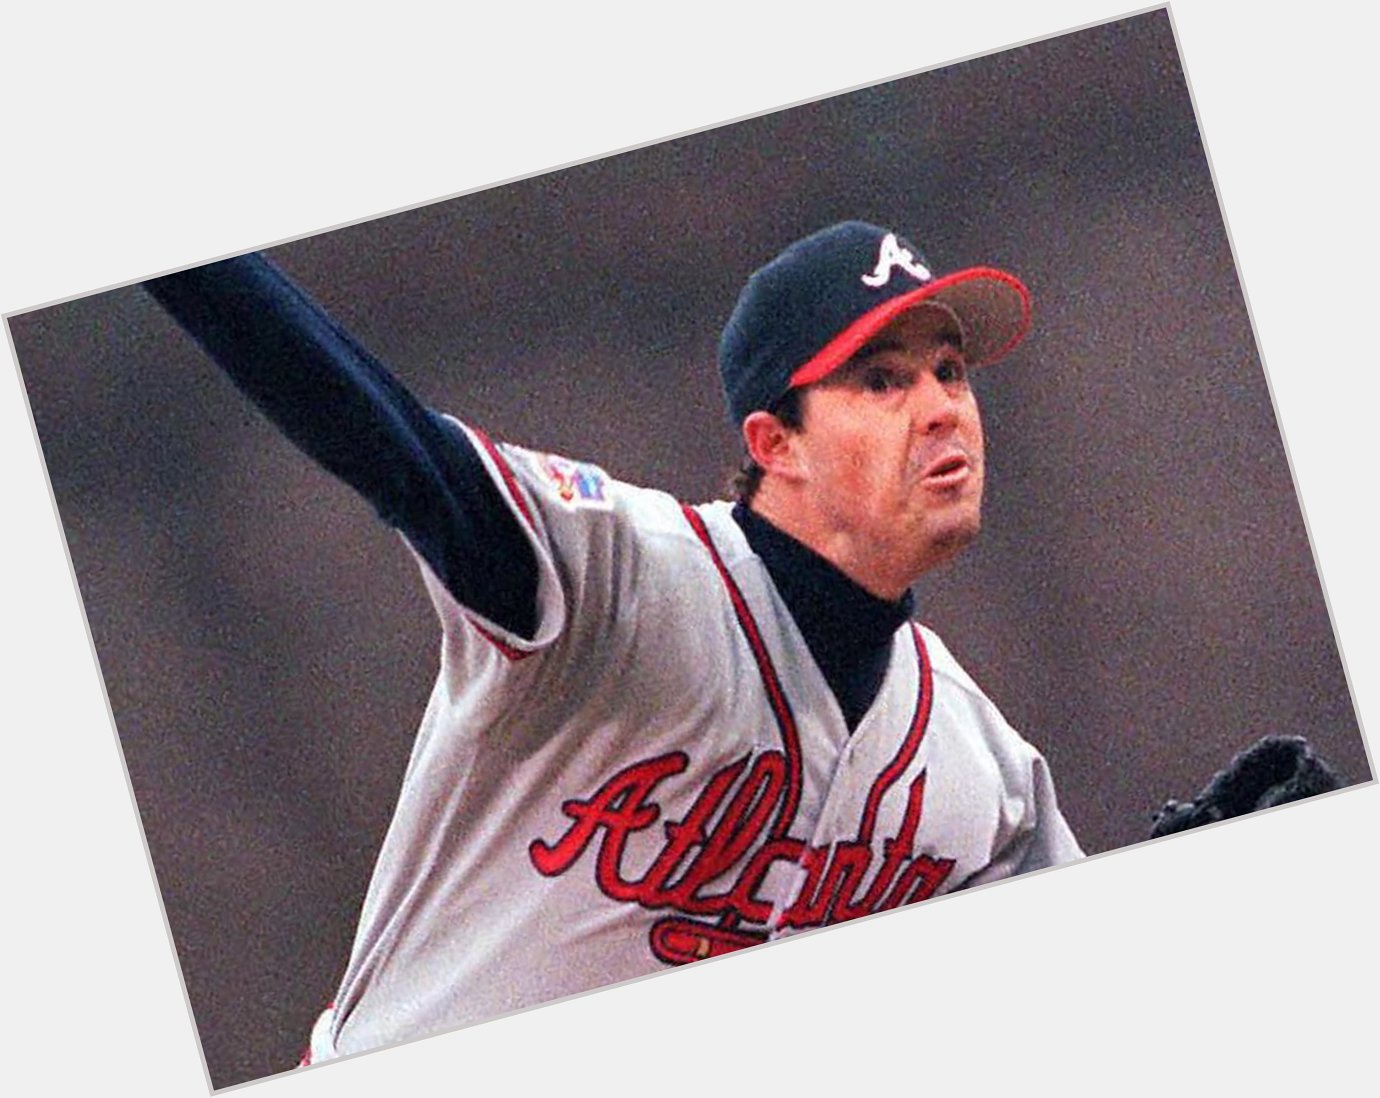 Happy birthday to Greg Maddux... who mowed down roided up sluggers with ease 